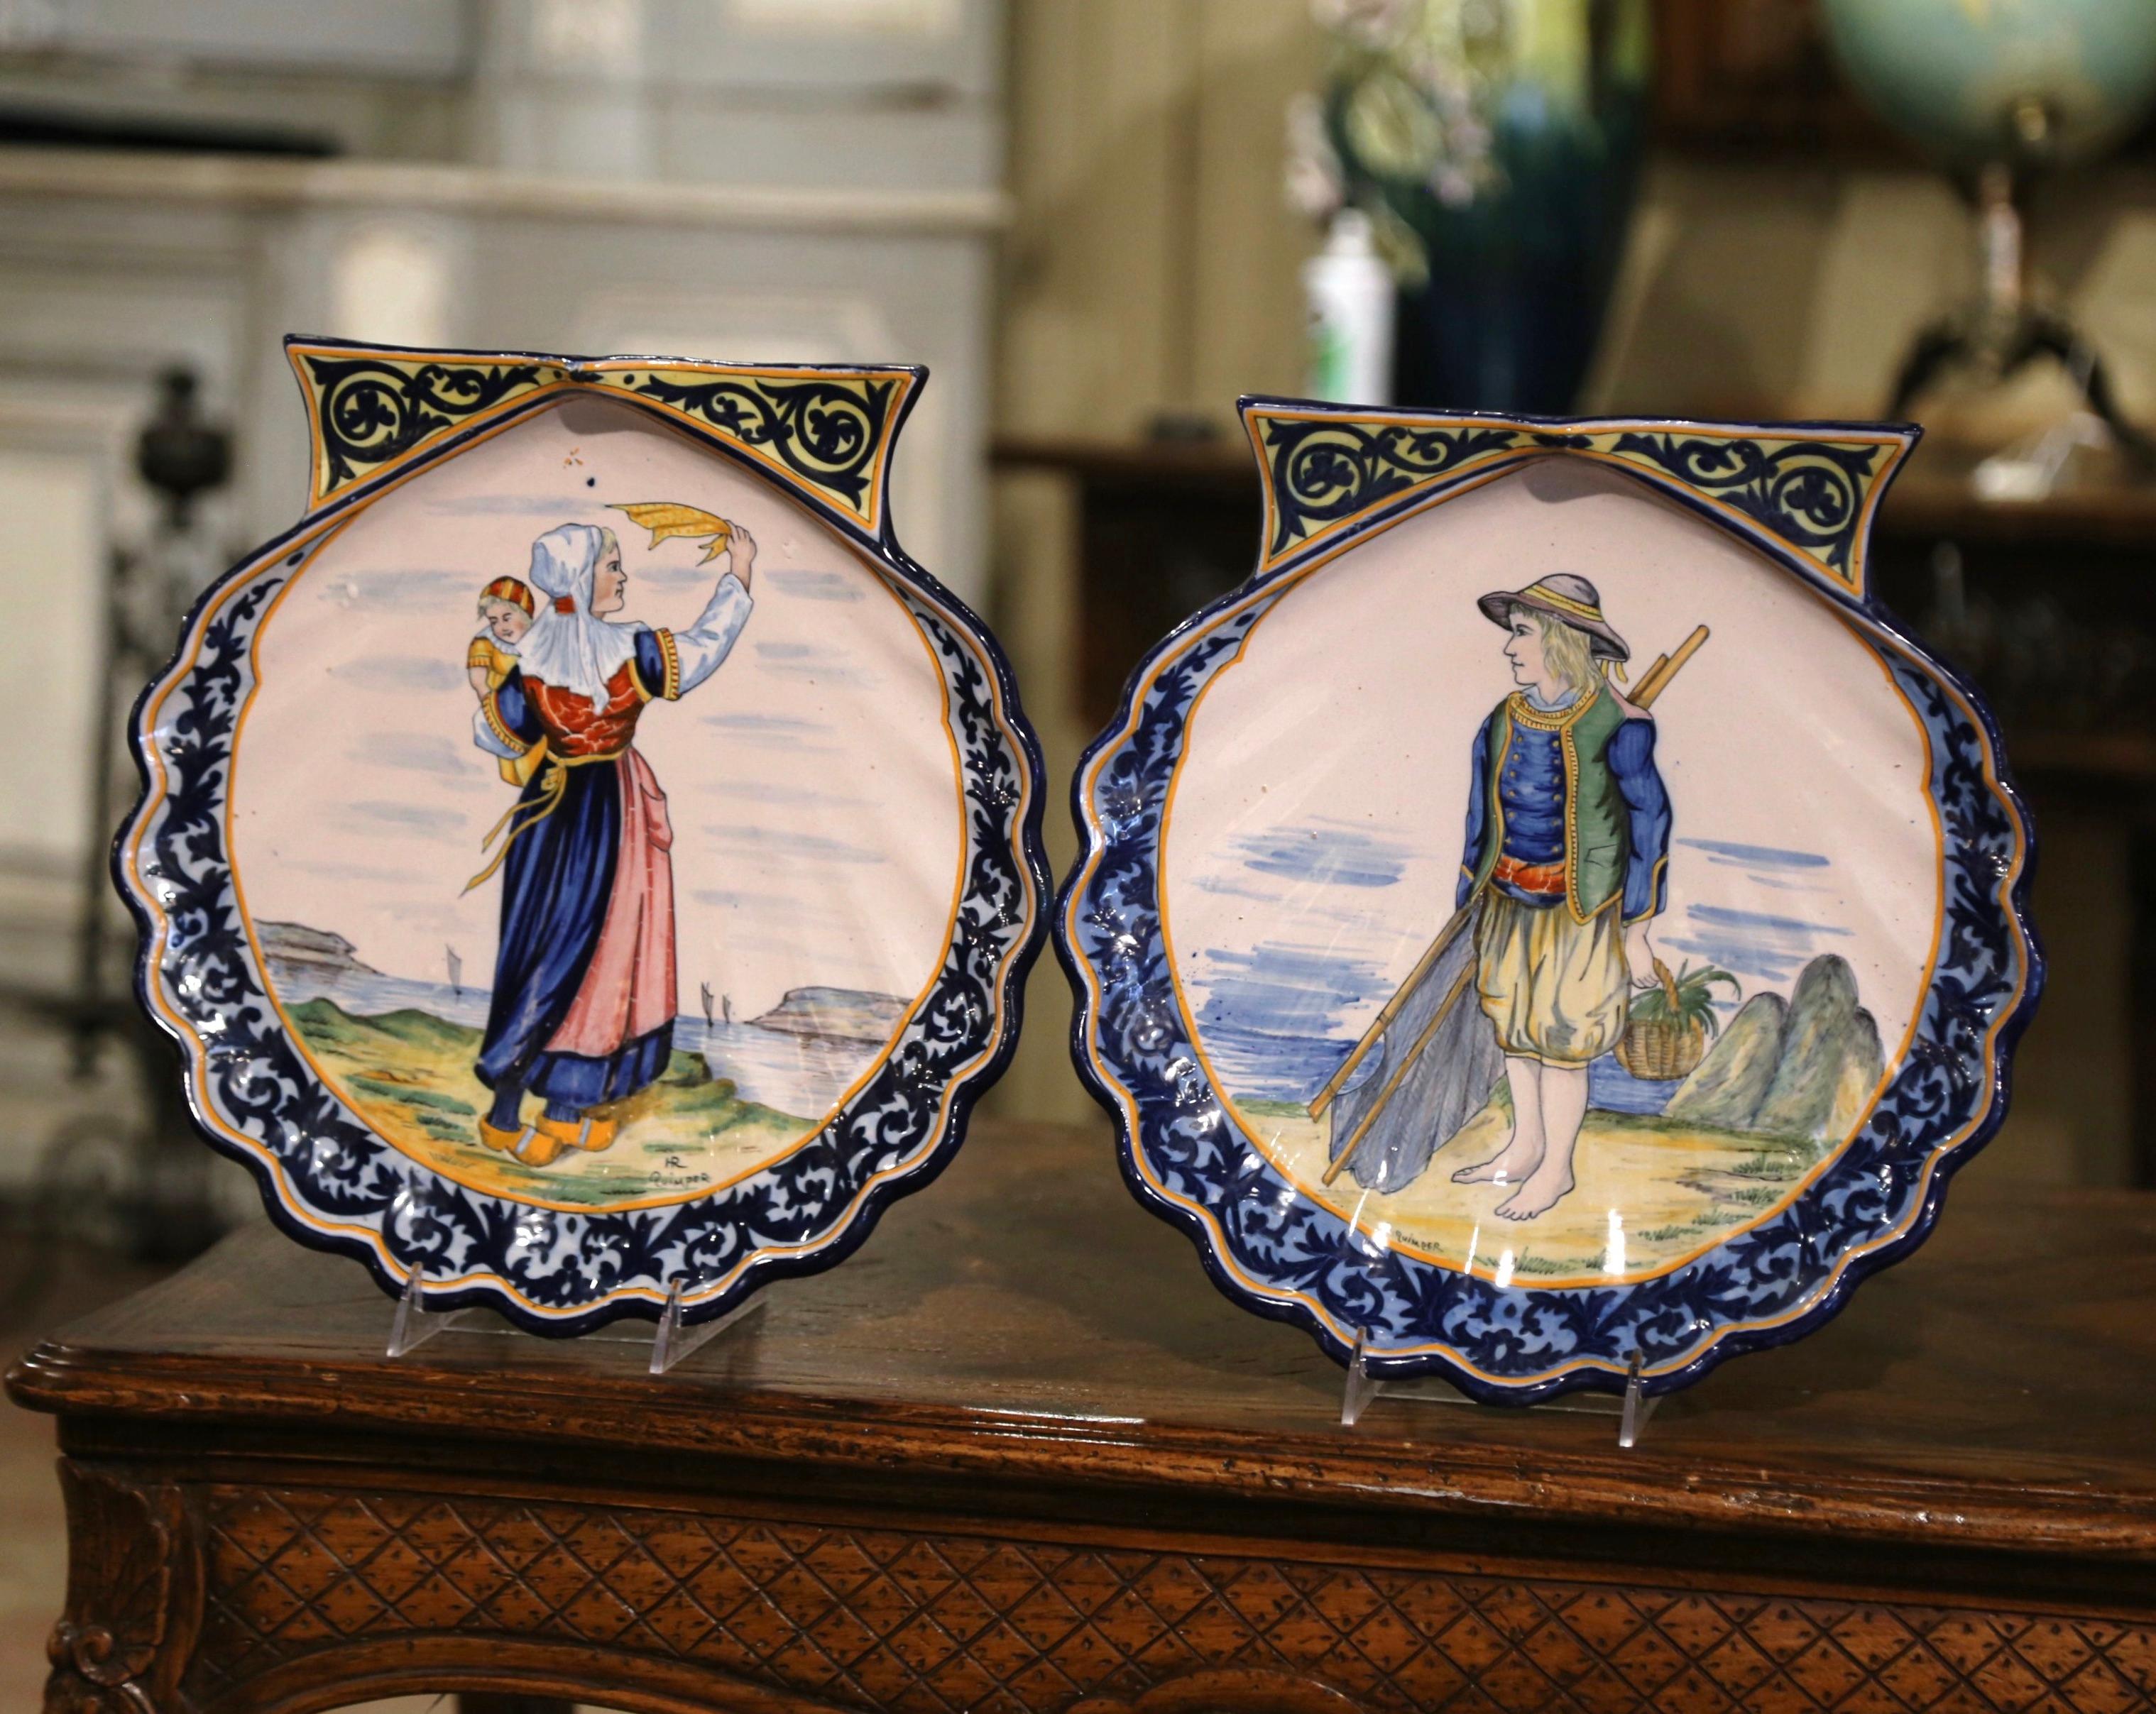 Decorate a kitchen wall or a shelf with this important pair of antique decorative platters. Created in France circa 1910, the large shell-form ceramic plates with scalloped edges, depict typical fishing and coastline scenes with Breton people in